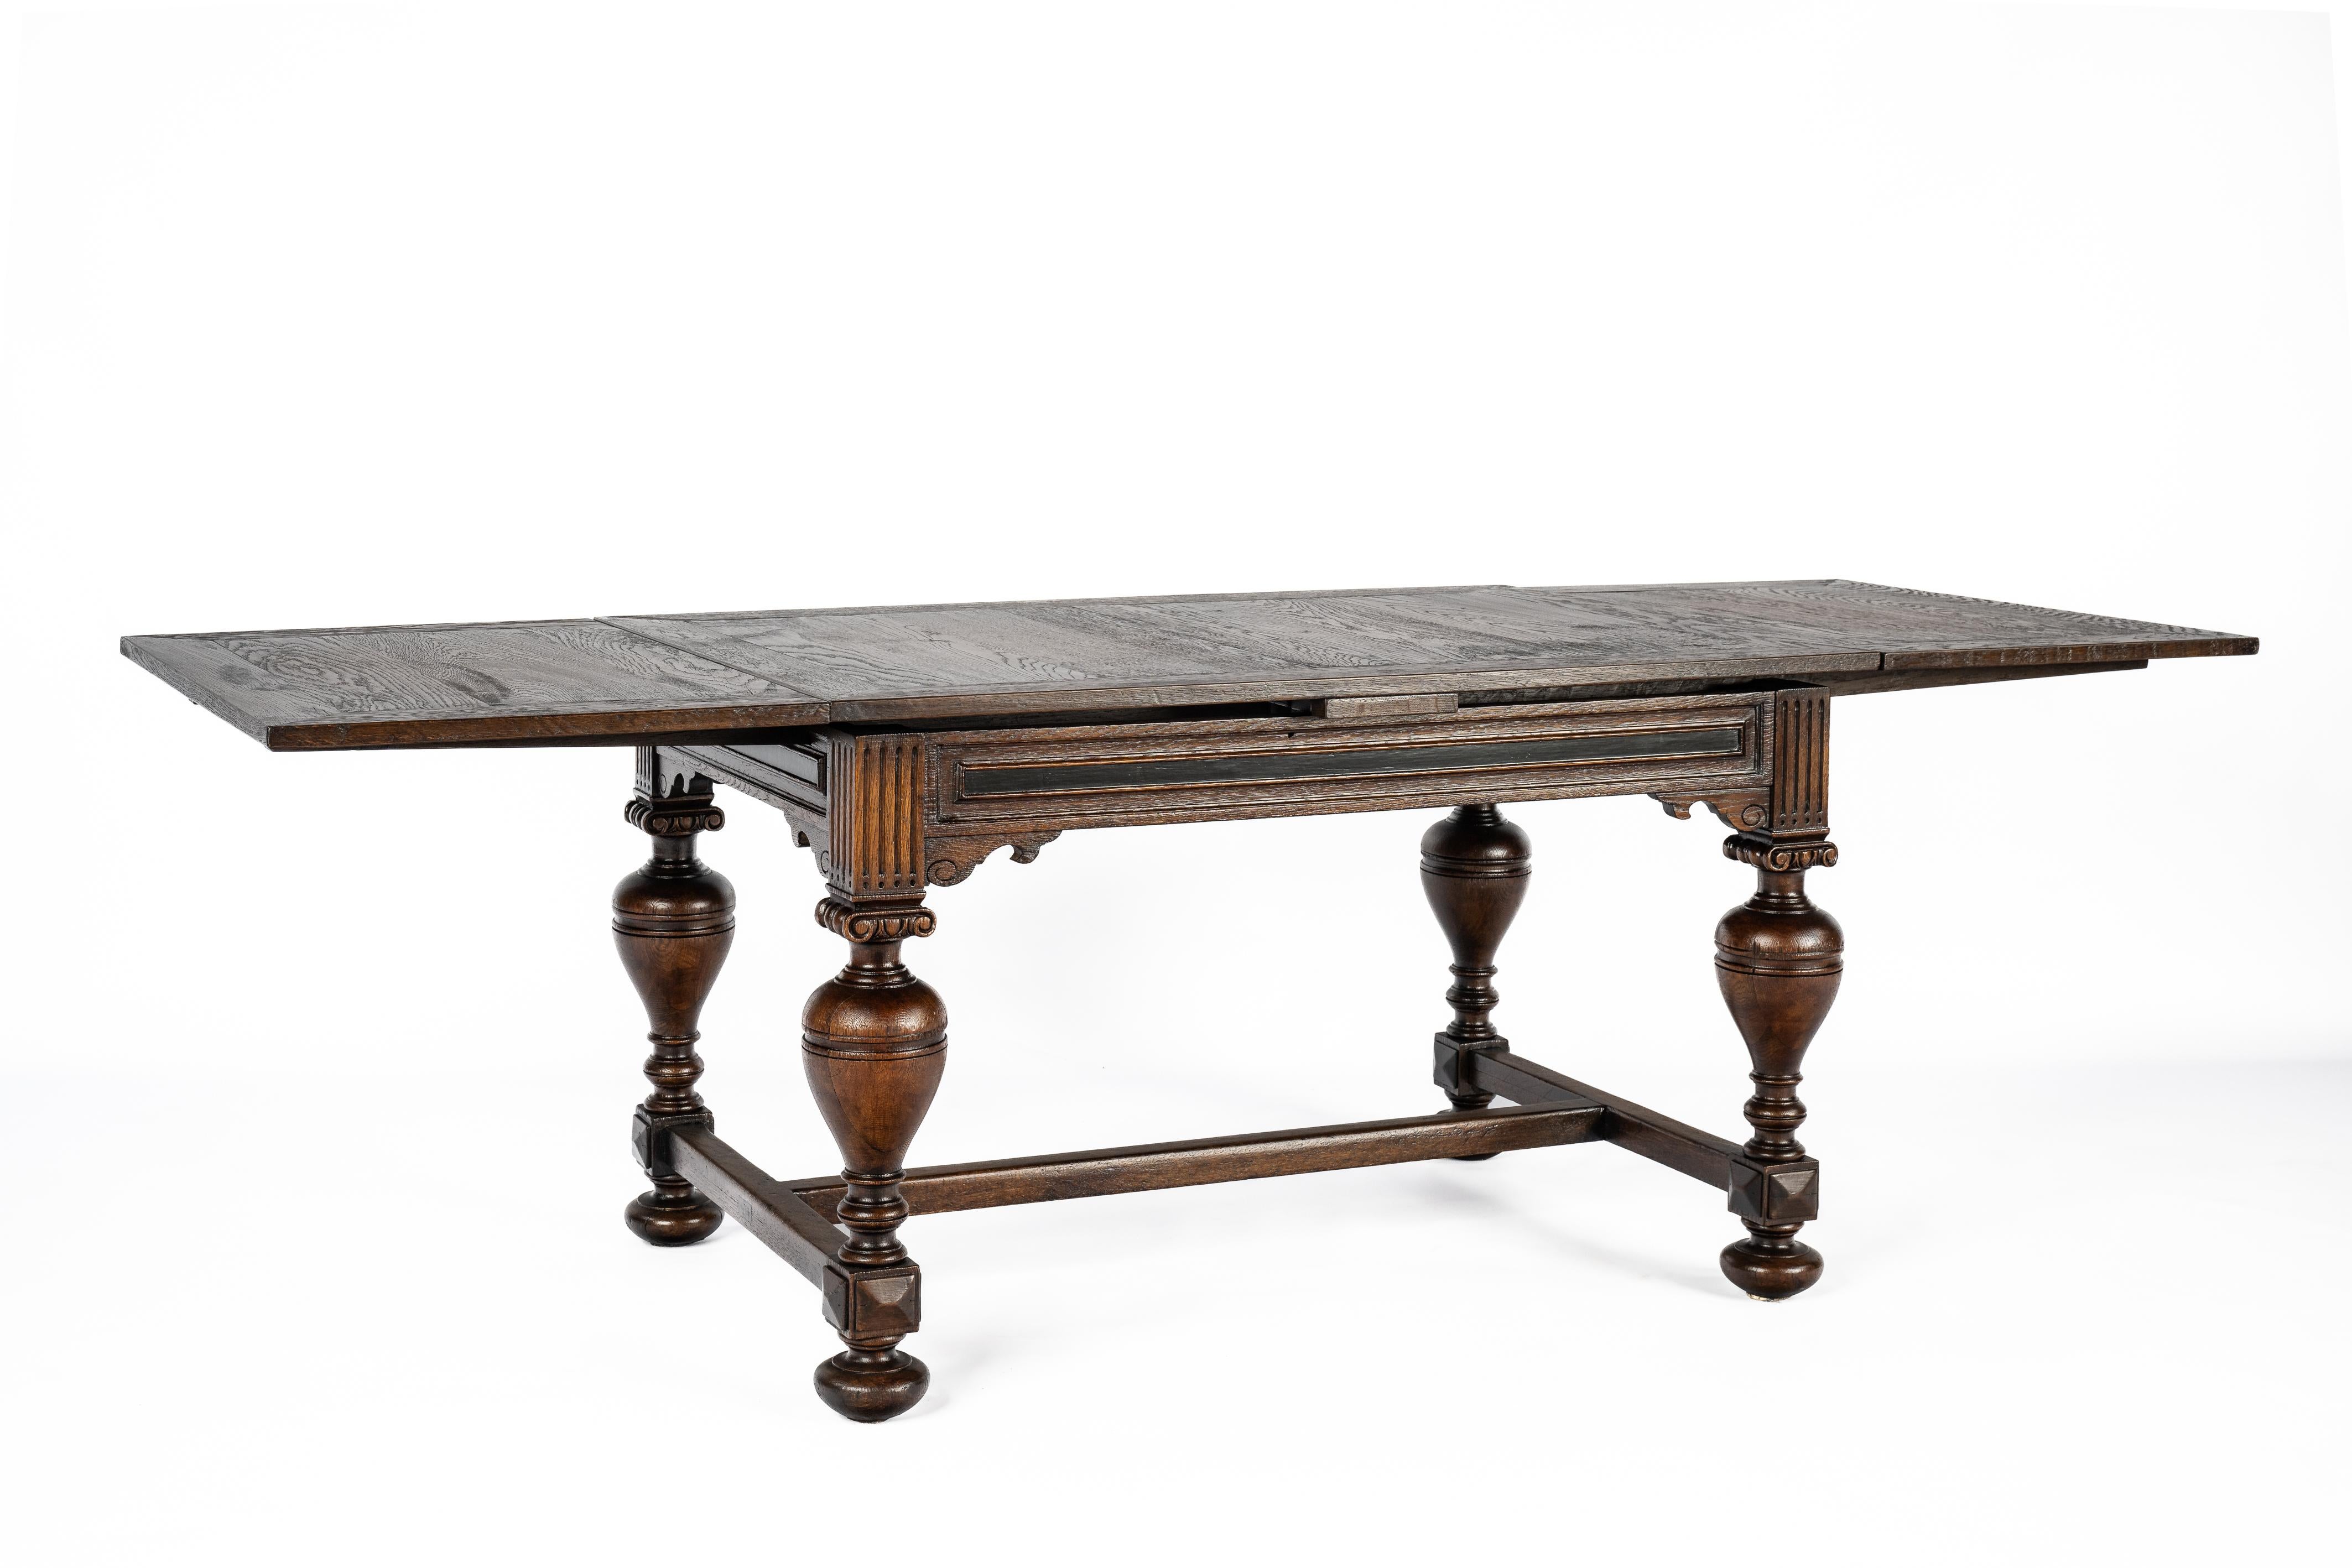 On offer here is a stunning table meticulously crafted from the finest European summer oak in the Netherlands around 1900. This exquisite piece embodies the defining traits of a typical Hollandic Renaissance table, featuring legs adorned with